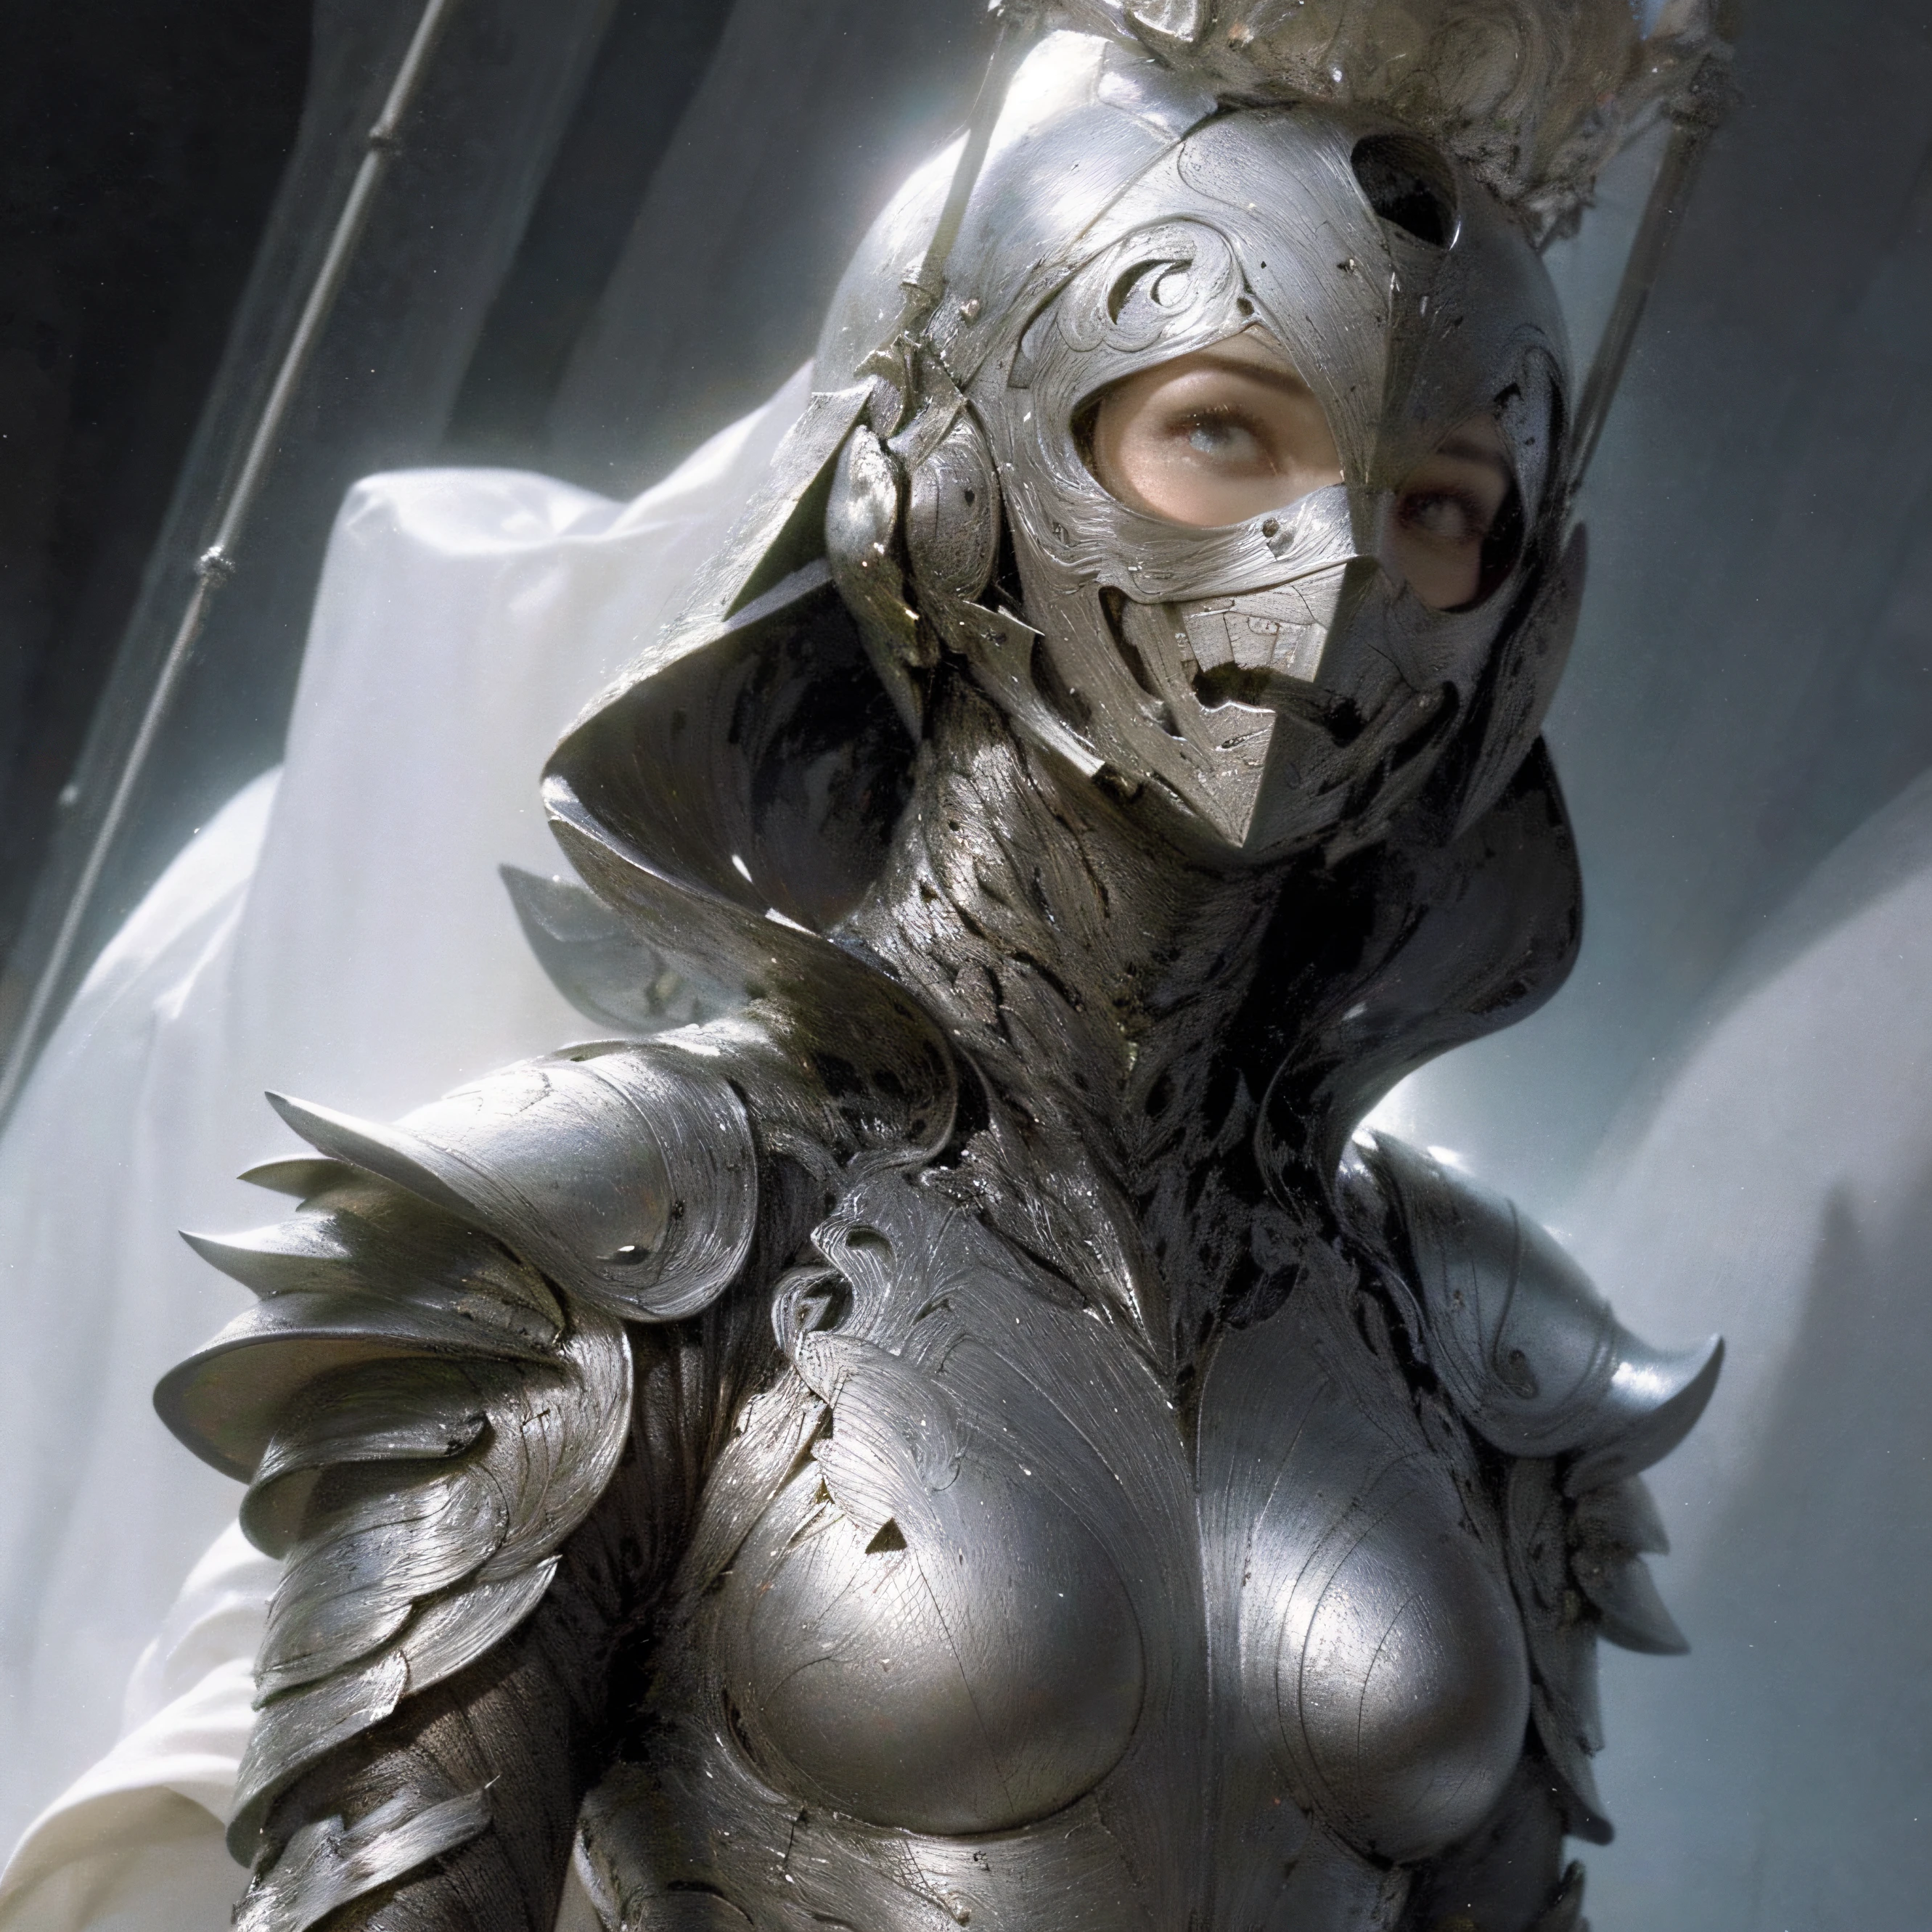 Black armor wrapped，shelmet，White cape，Older women，modern day{{{Small  breasts}}}, strong rimlight, intense shading, Girl, Solo - SeaArt AI